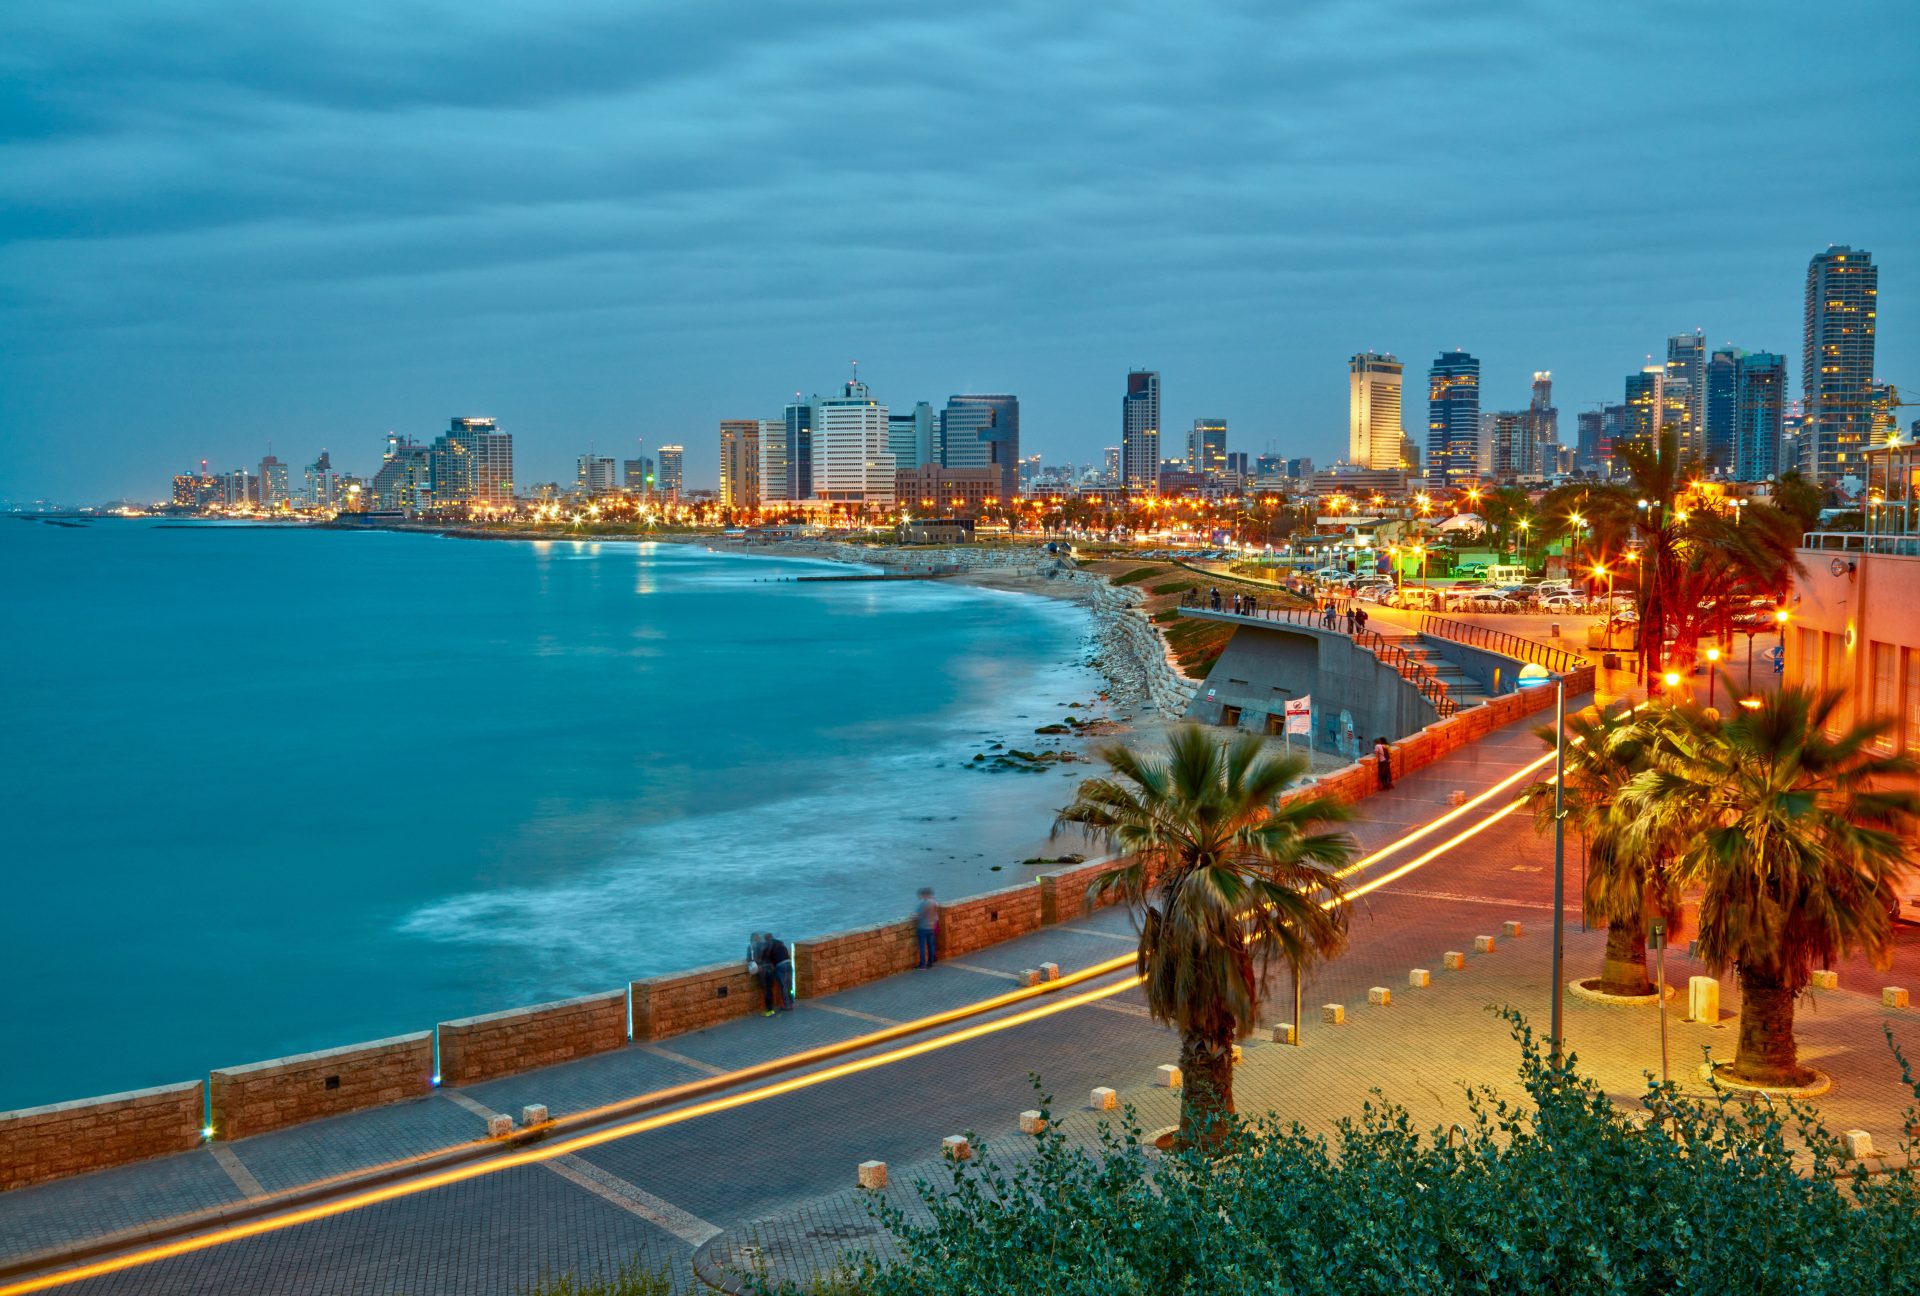 Tel Aviv Israel. After sunset view from Jaffa